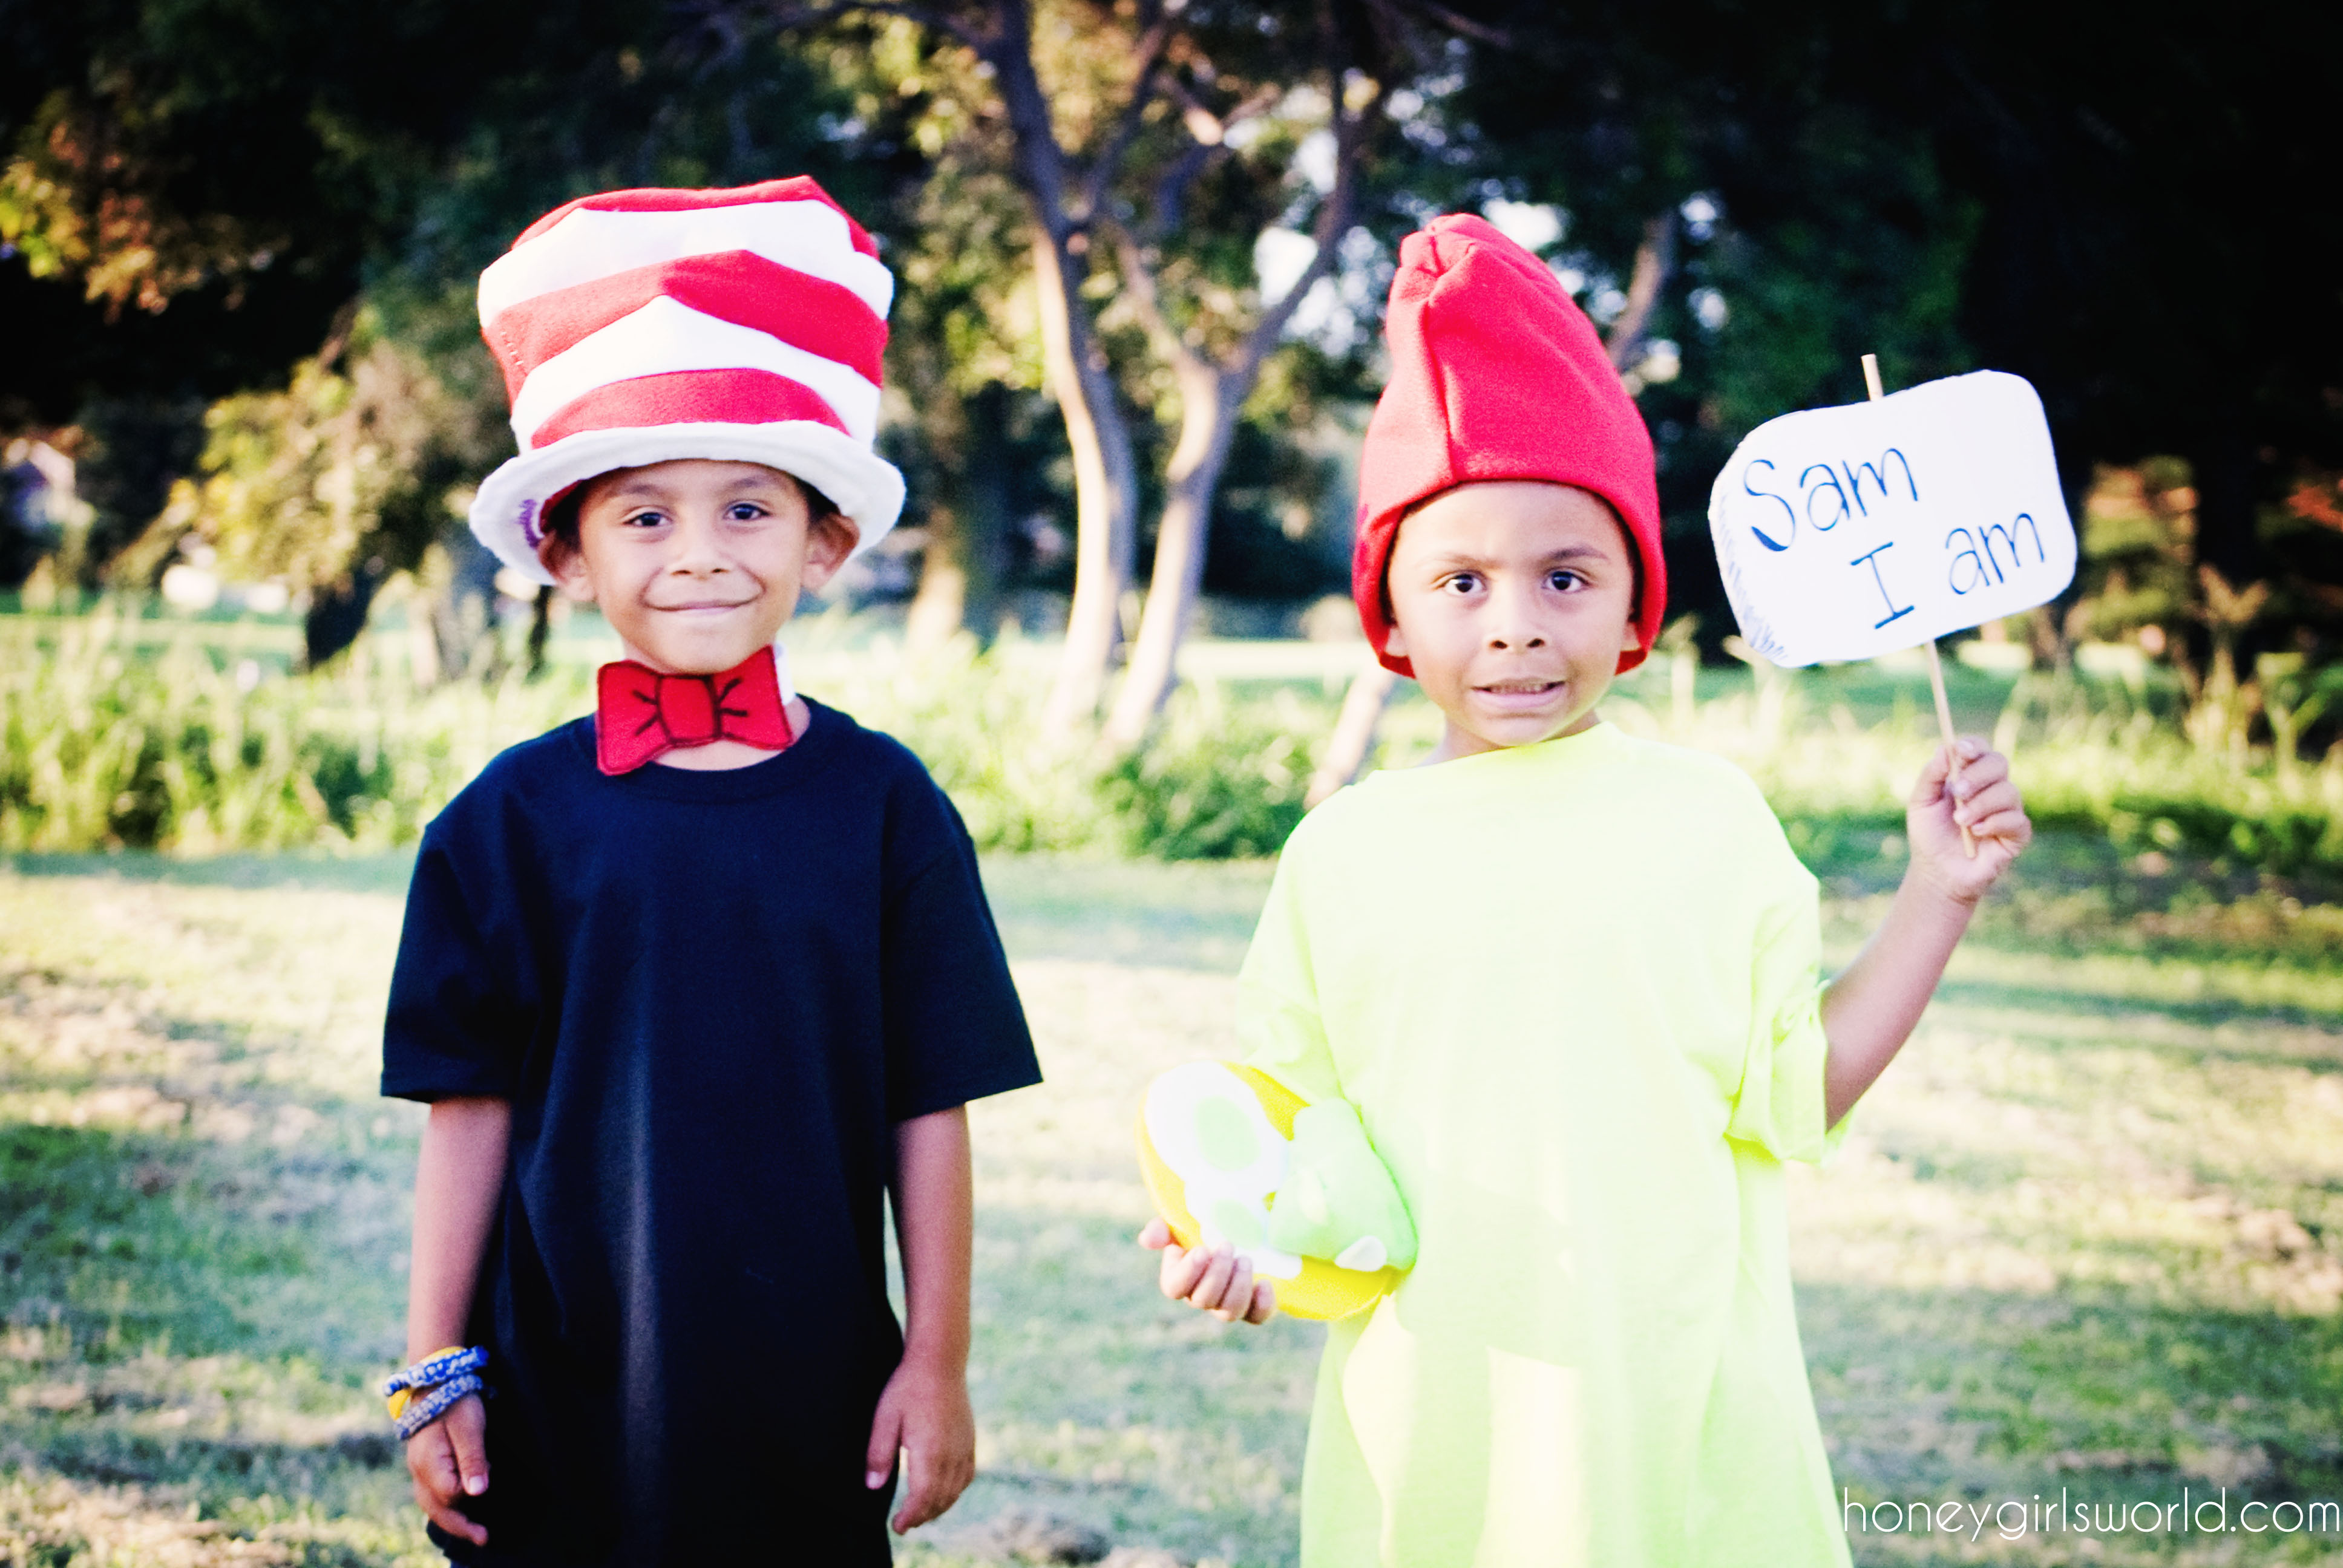 Book Character Dress Up Day - Easy DIY Dr. Seuss Cat In The Hat and Sam I Am Costumes